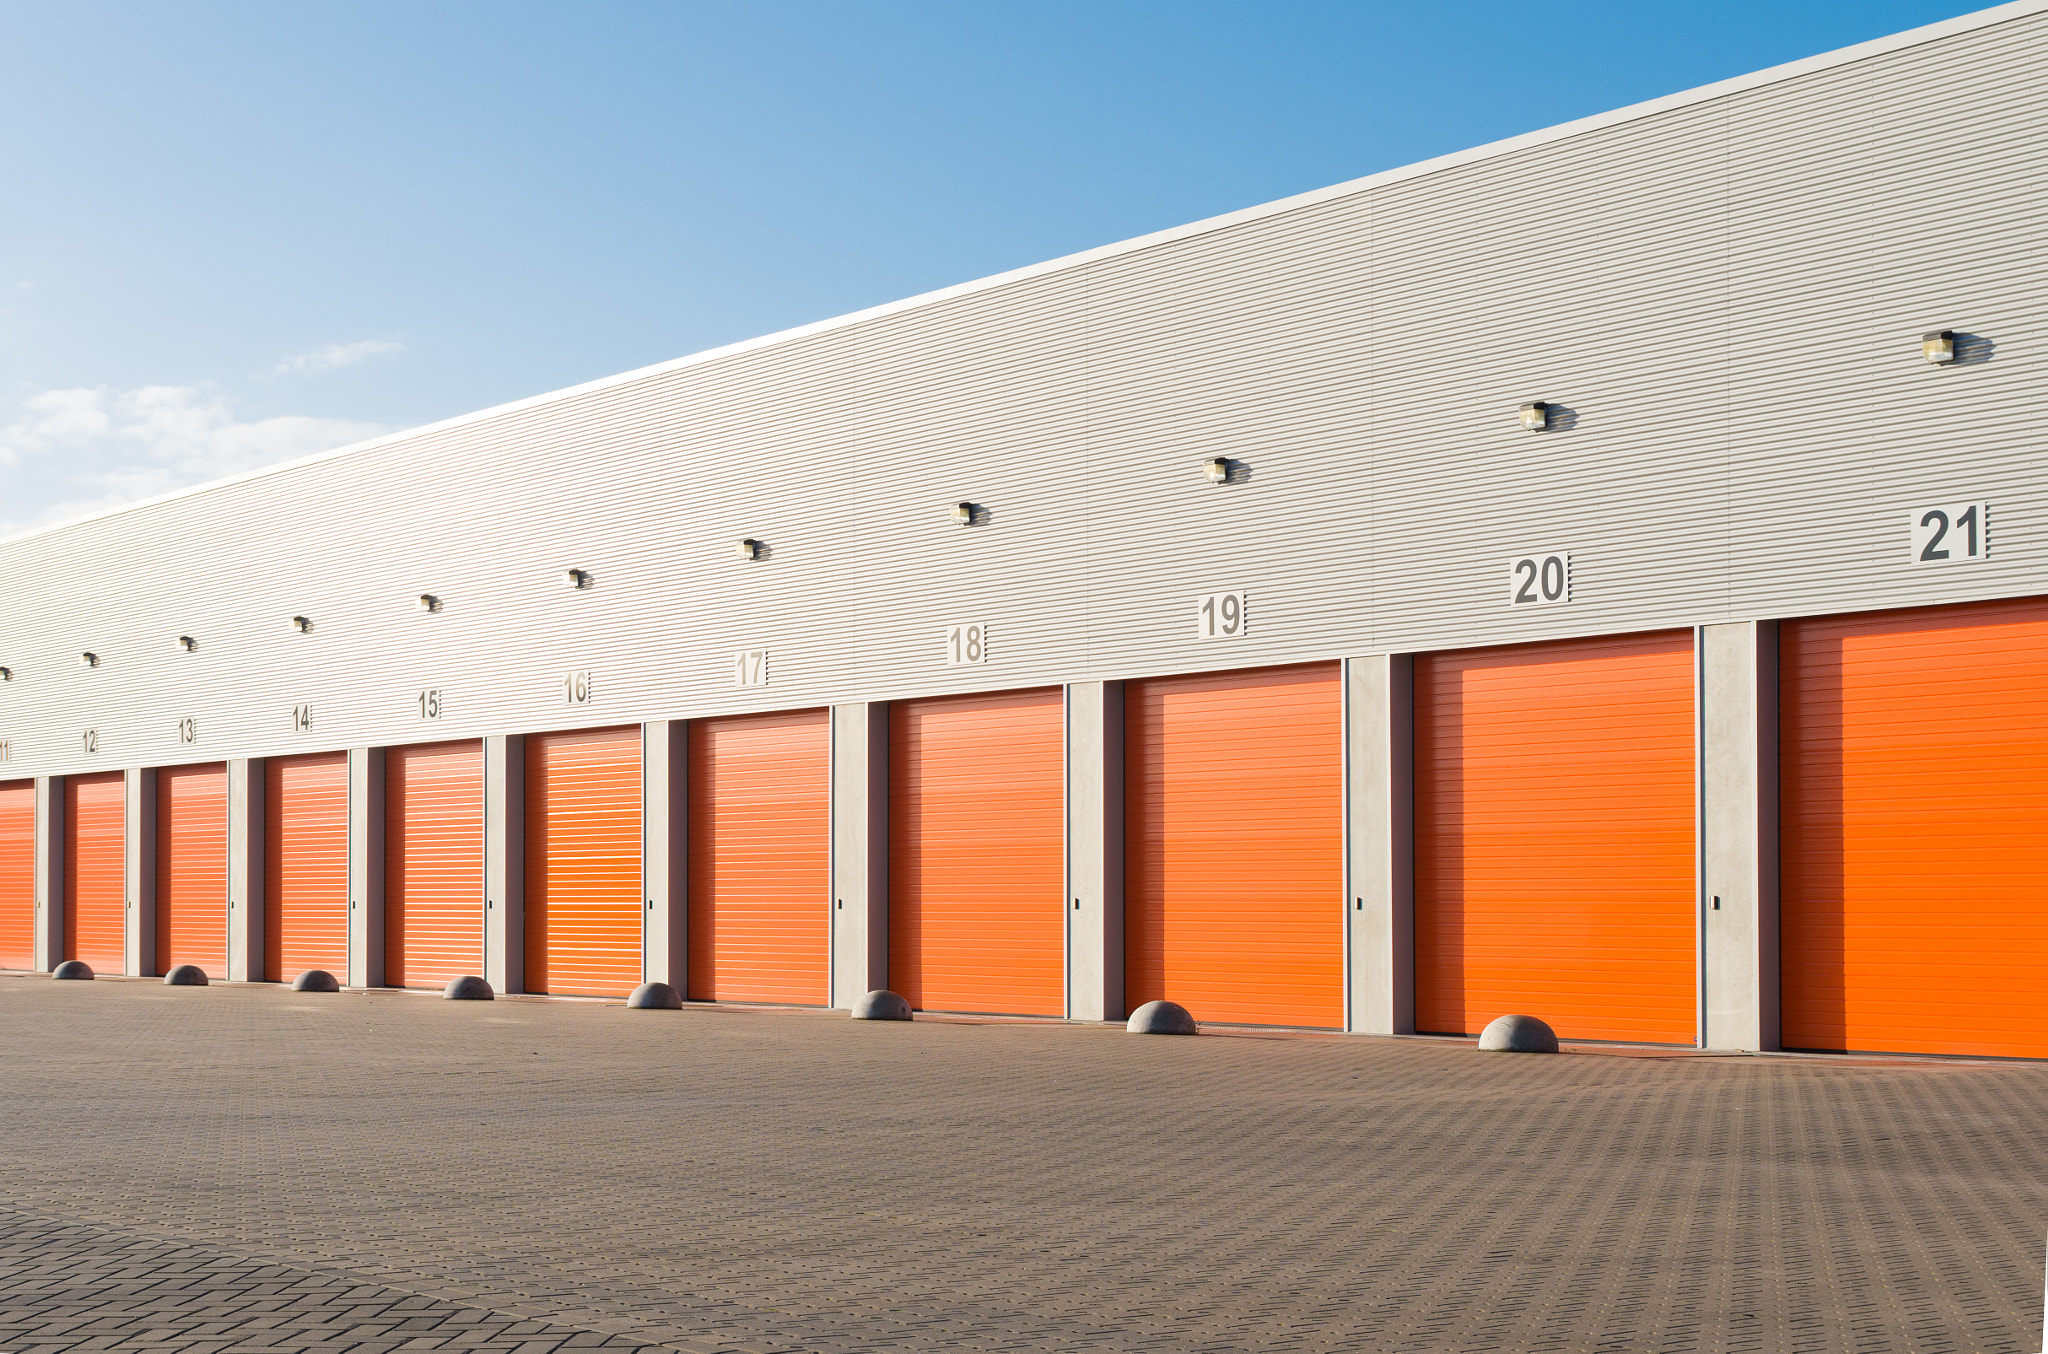 Pentax K-5 IIs + Tamron SP AF 17-50mm F2.8 XR Di II LD Aspherical (IF) sample photo. Commercial warehouse exterior photography